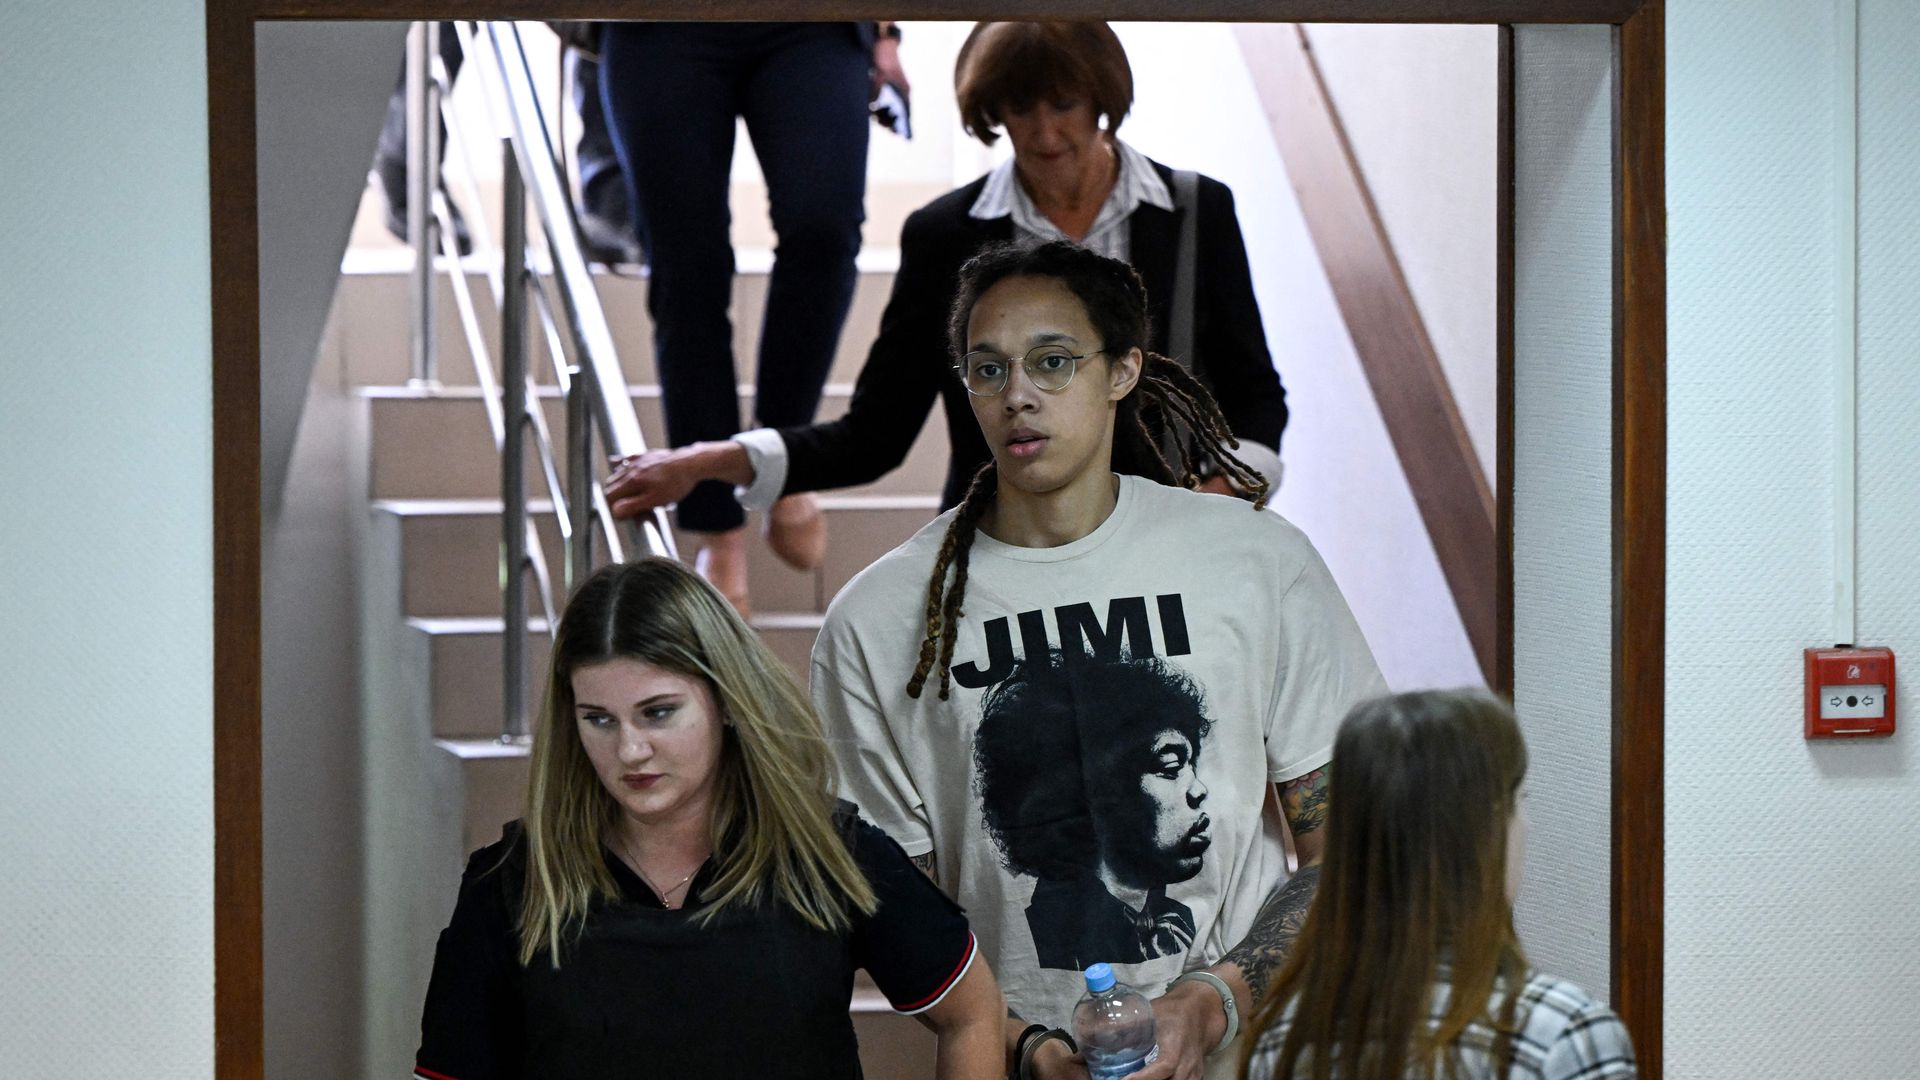 Brittney Griner (C) arrives to a hearing at the Khimki Court, outside Moscow on July 1